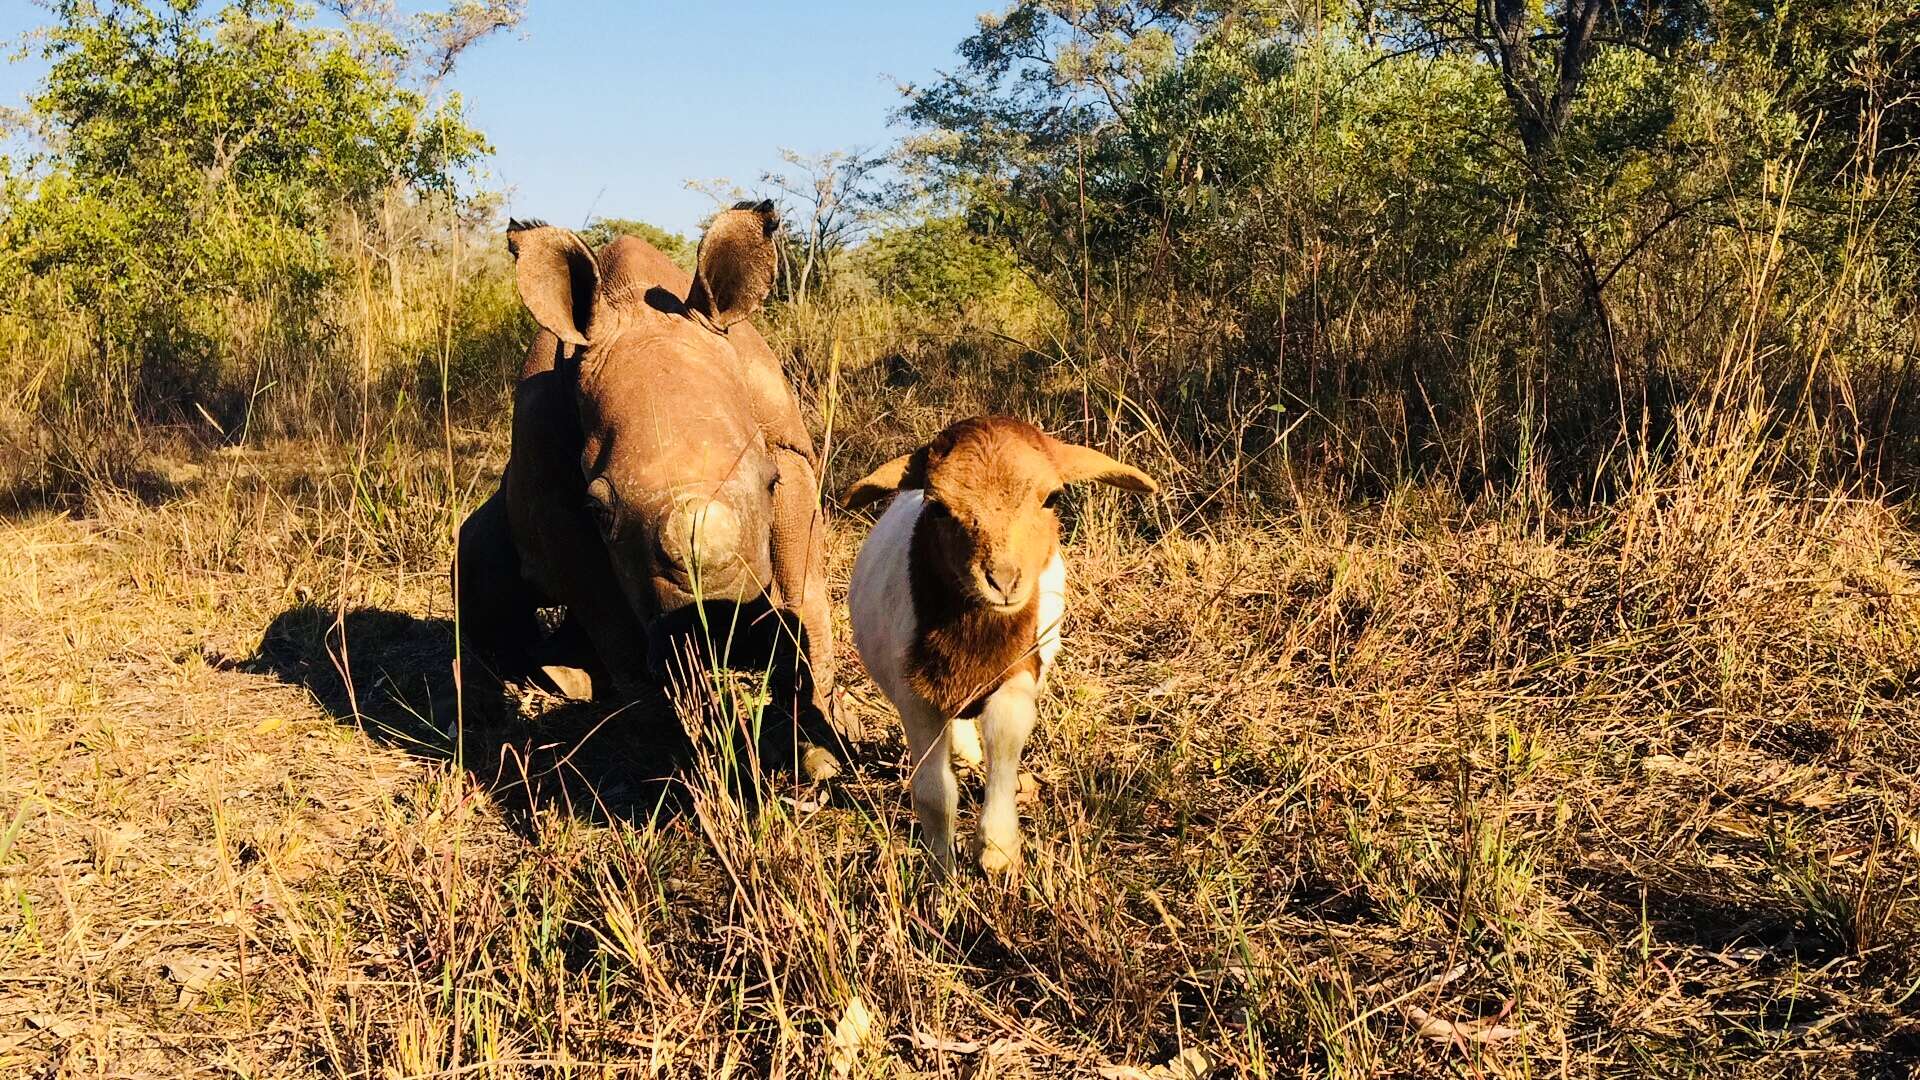 Baby rhino and lamb friend in South Africa